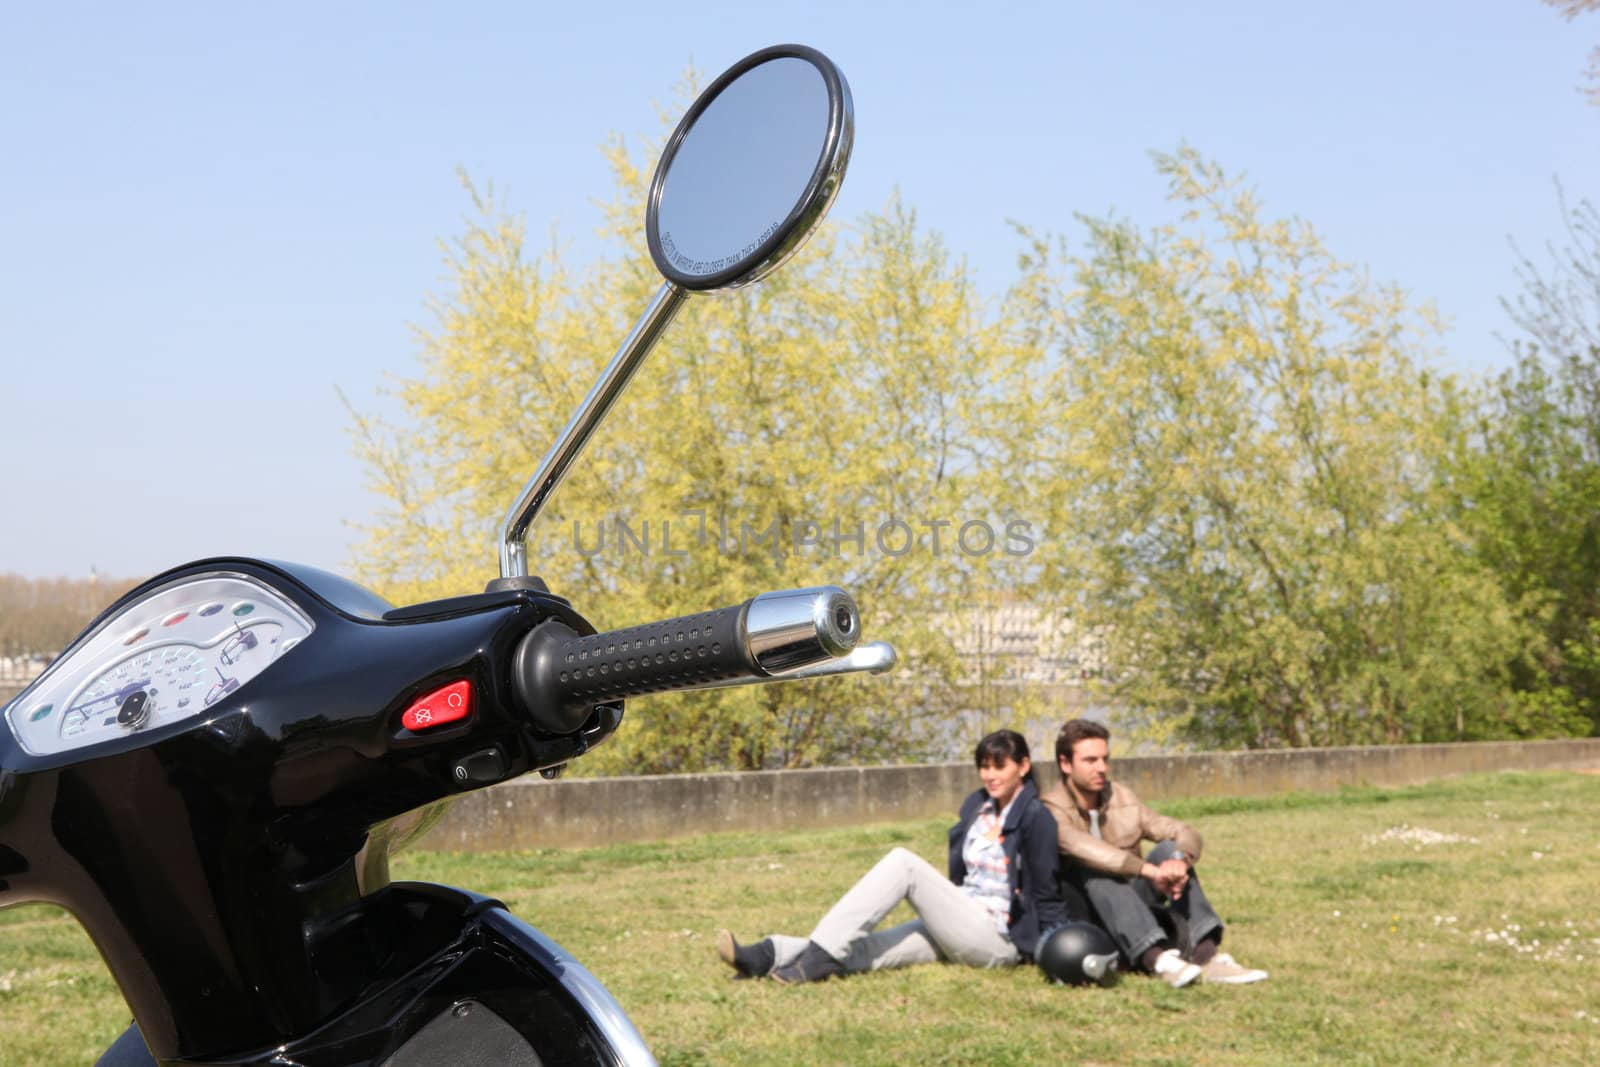 Couple sat near scooter